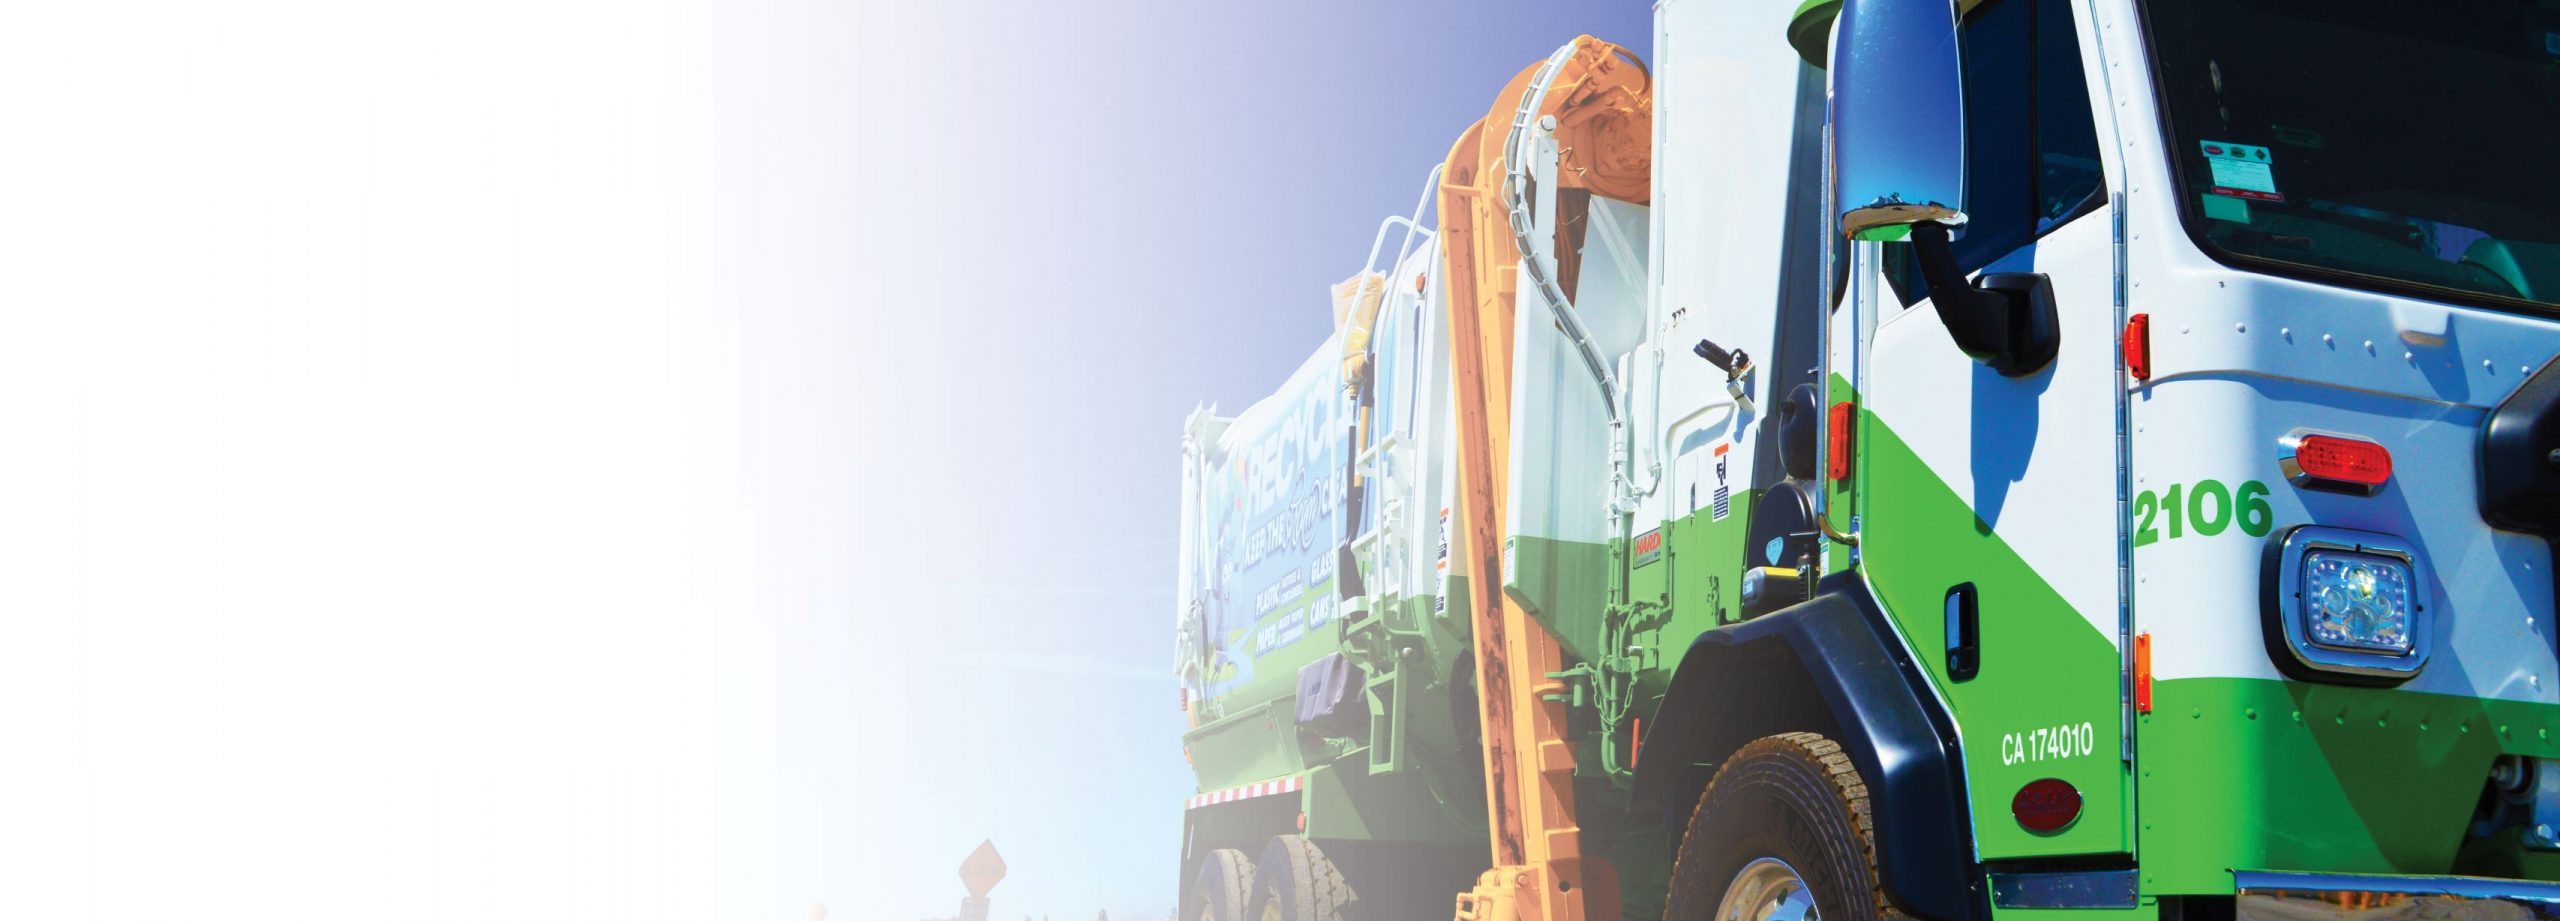 https://www.midvalleydisposal.com/wp-content/uploads/2021/11/Recycle-Truck-Header-1-scaled.jpg